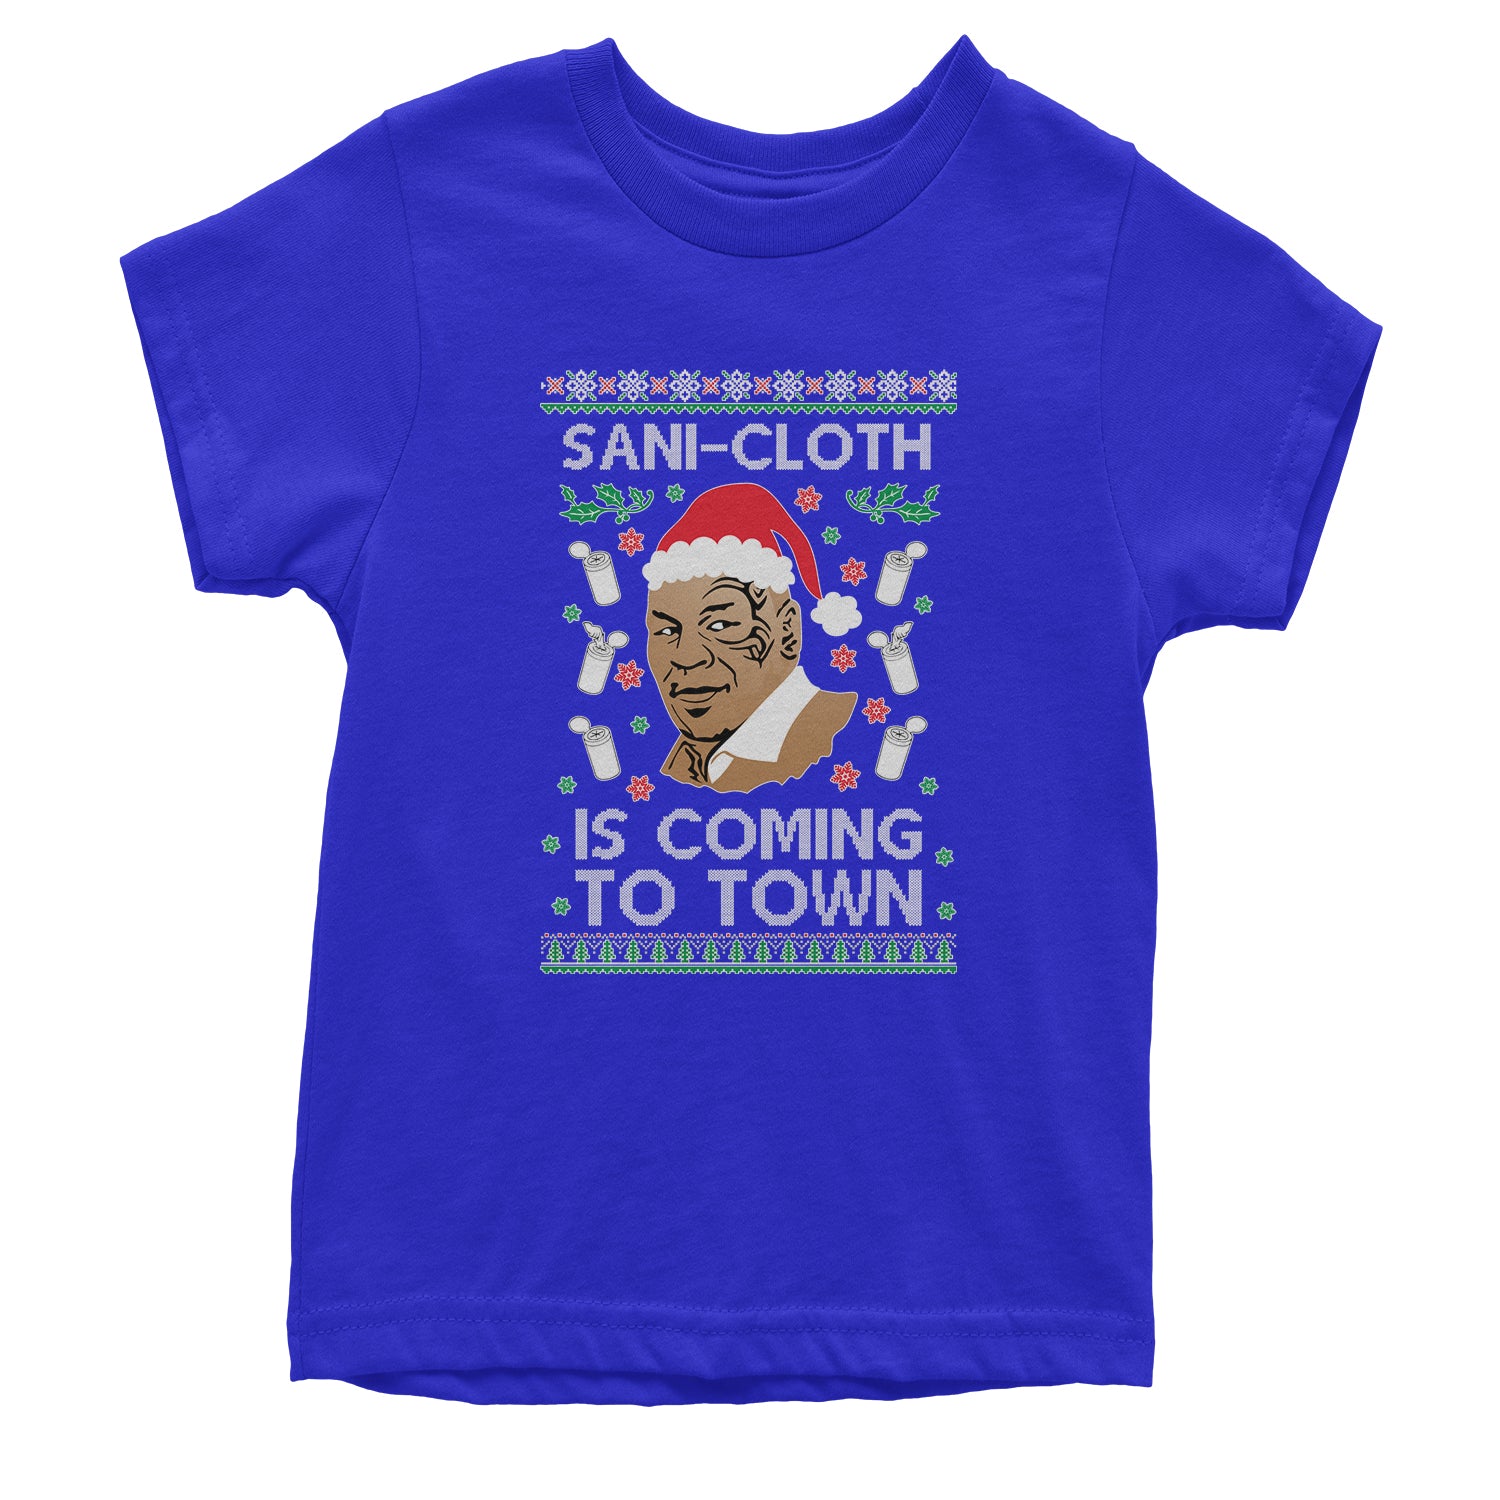 Sani-Cloth Is Coming To Town Ugly Christmas Youth T-shirt 2021, mike, miketyson, tyson by Expression Tees